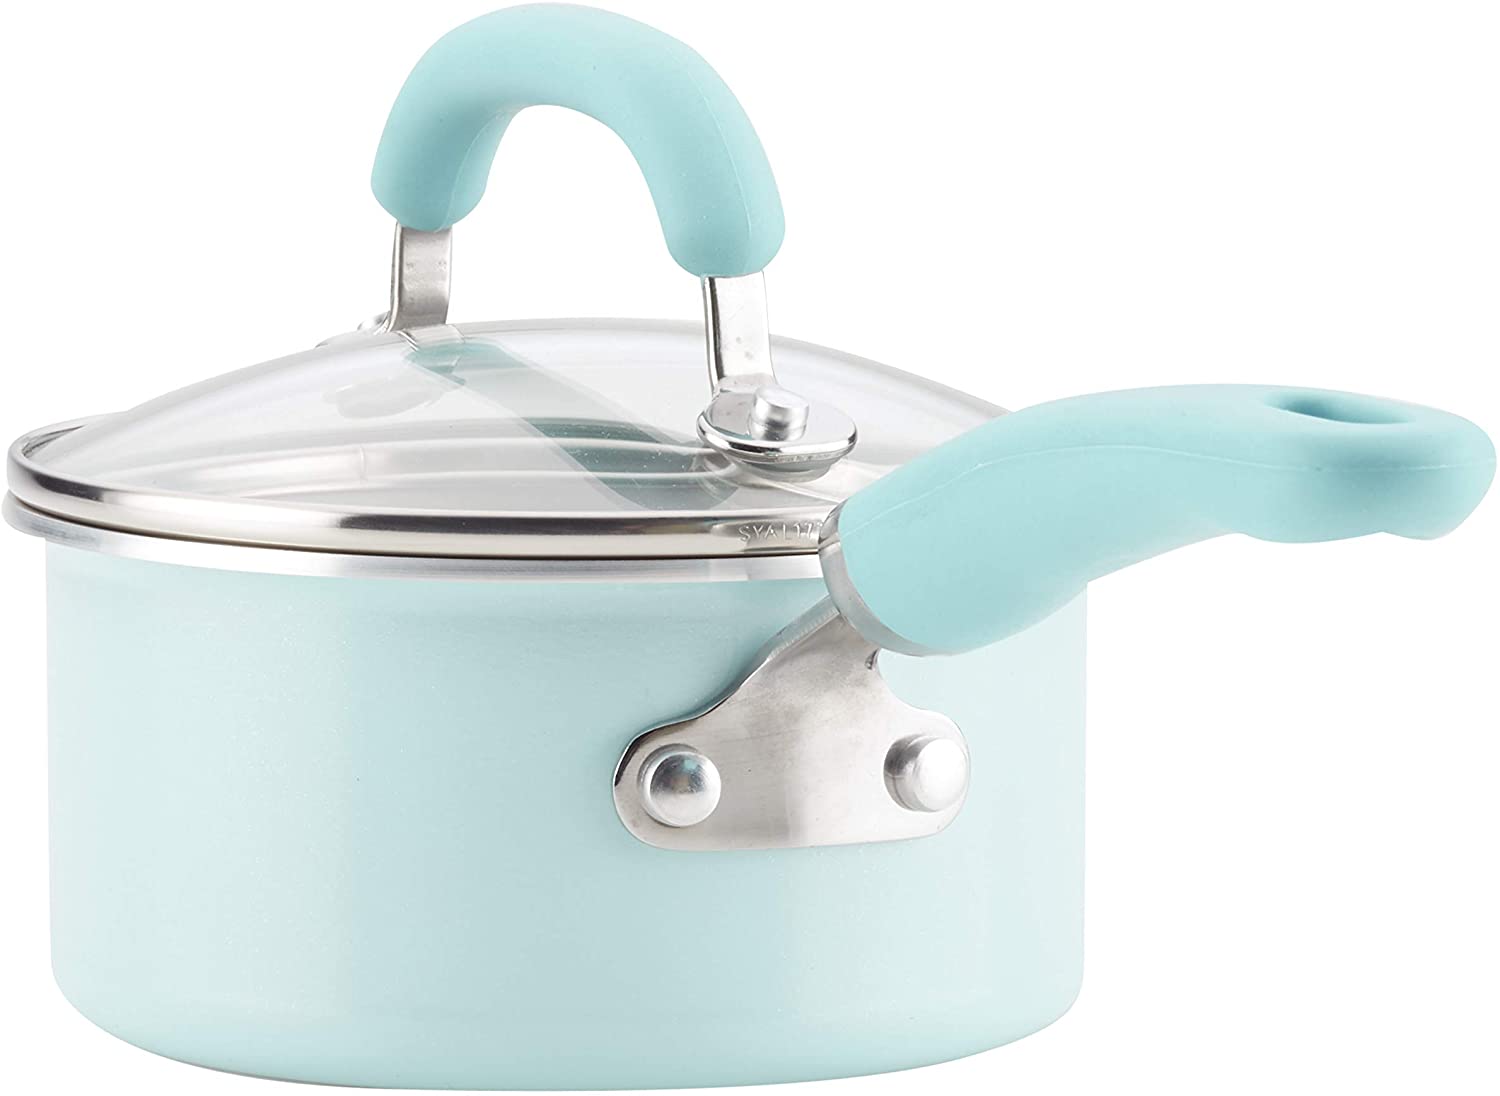 Rachael Ray Create Delicious Nonstick Cookware Pots and Pans Set, 13 Piece,  Teal Shimmer & Create